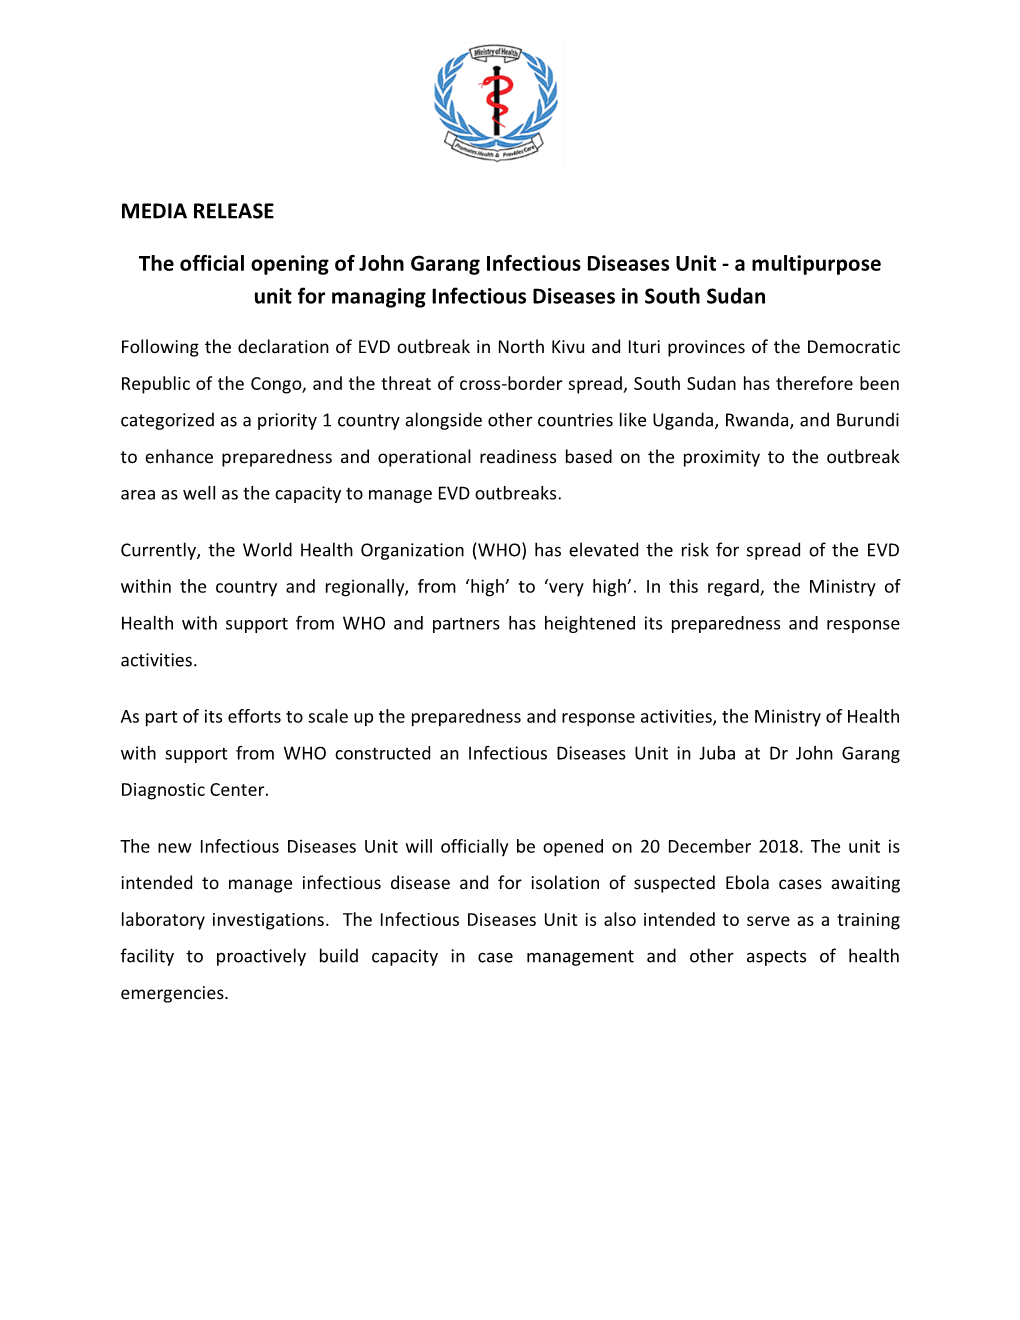 MEDIA RELEASE the Official Opening of John Garang Infectious Diseases Unit